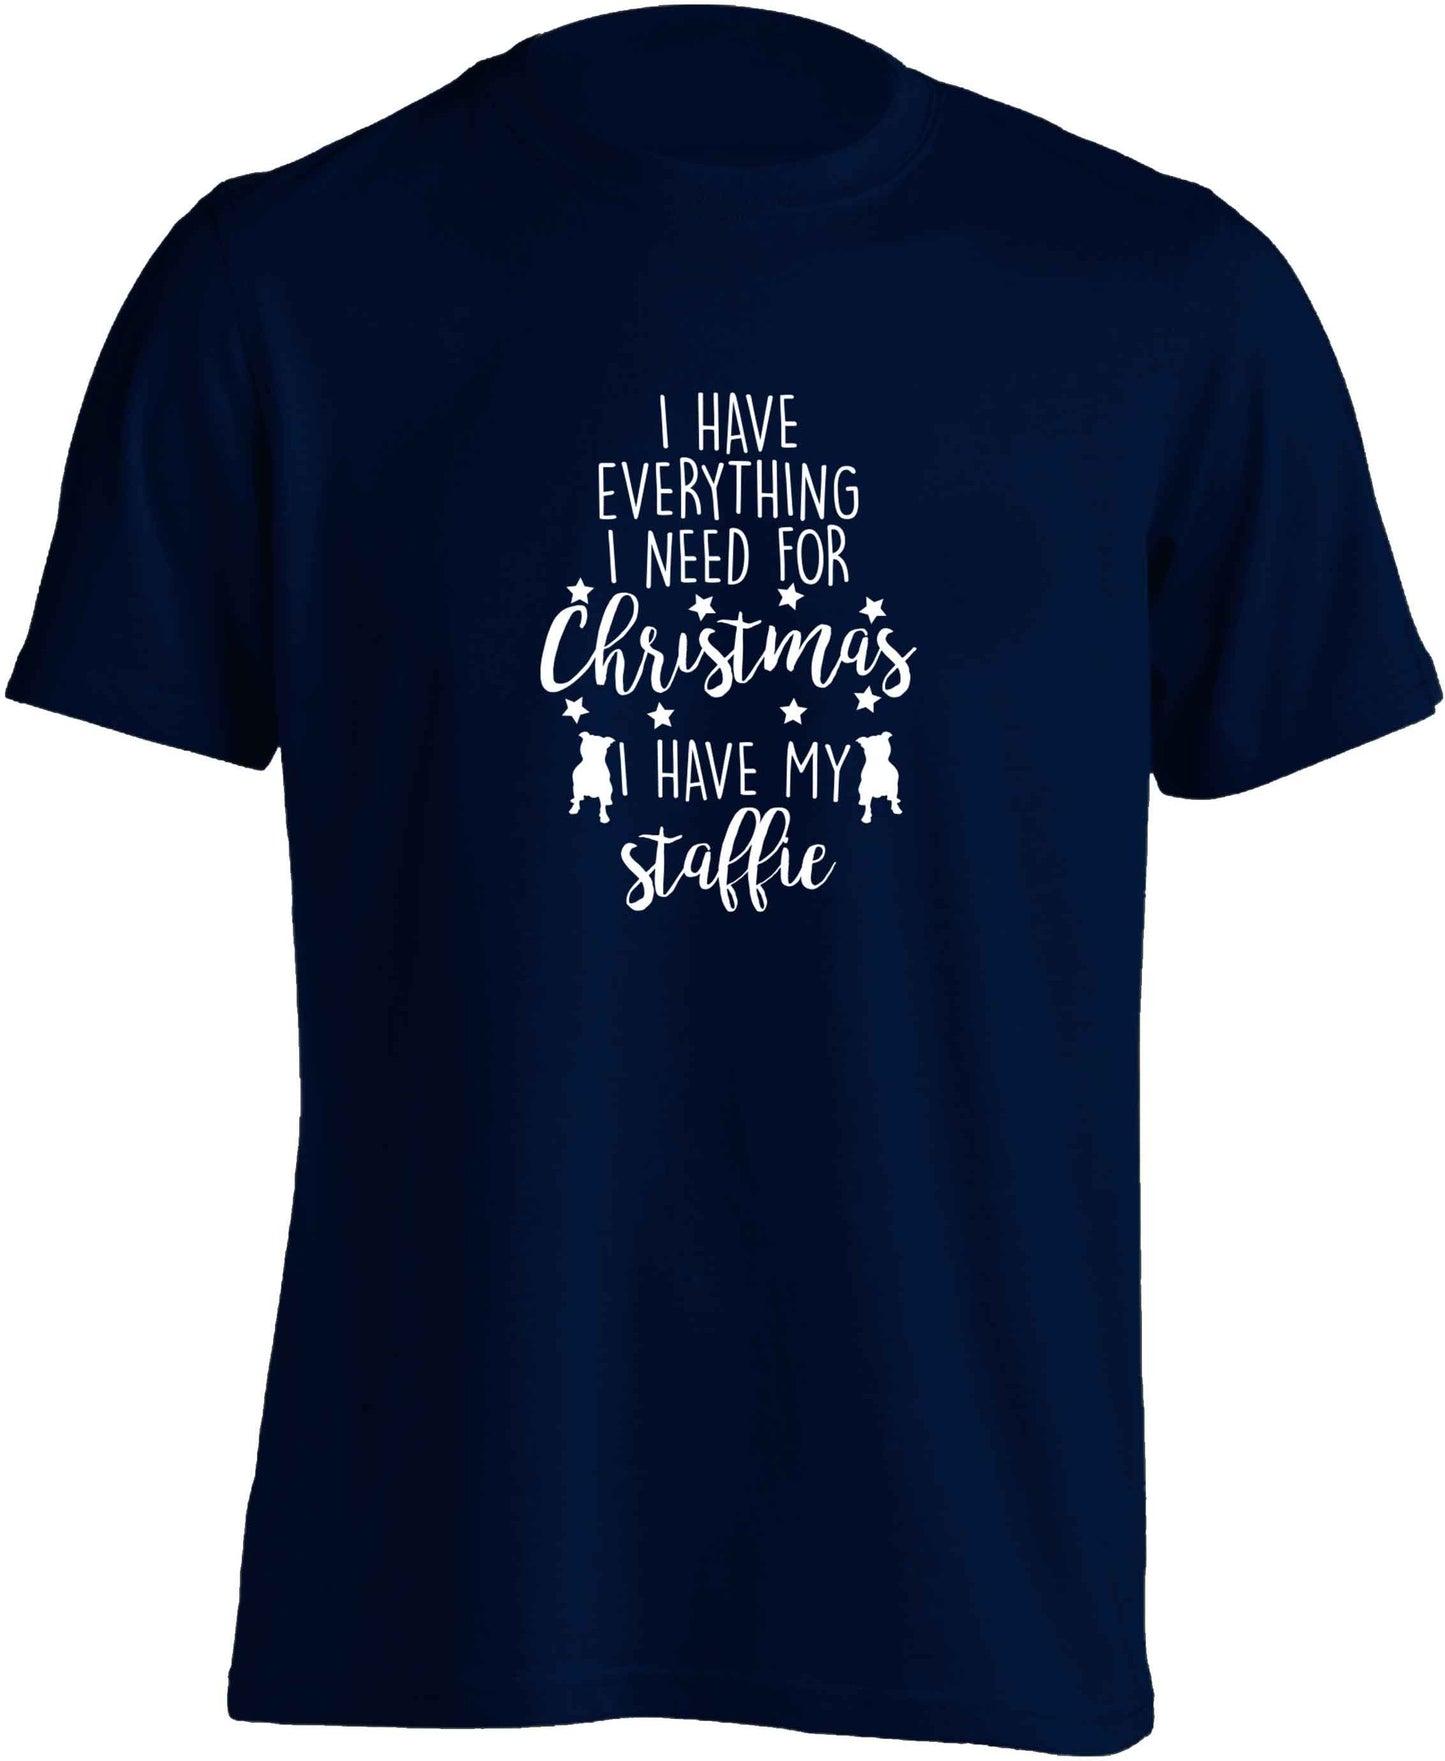 I have everything I need for Christmas I have my staffie adults unisex navy Tshirt 2XL